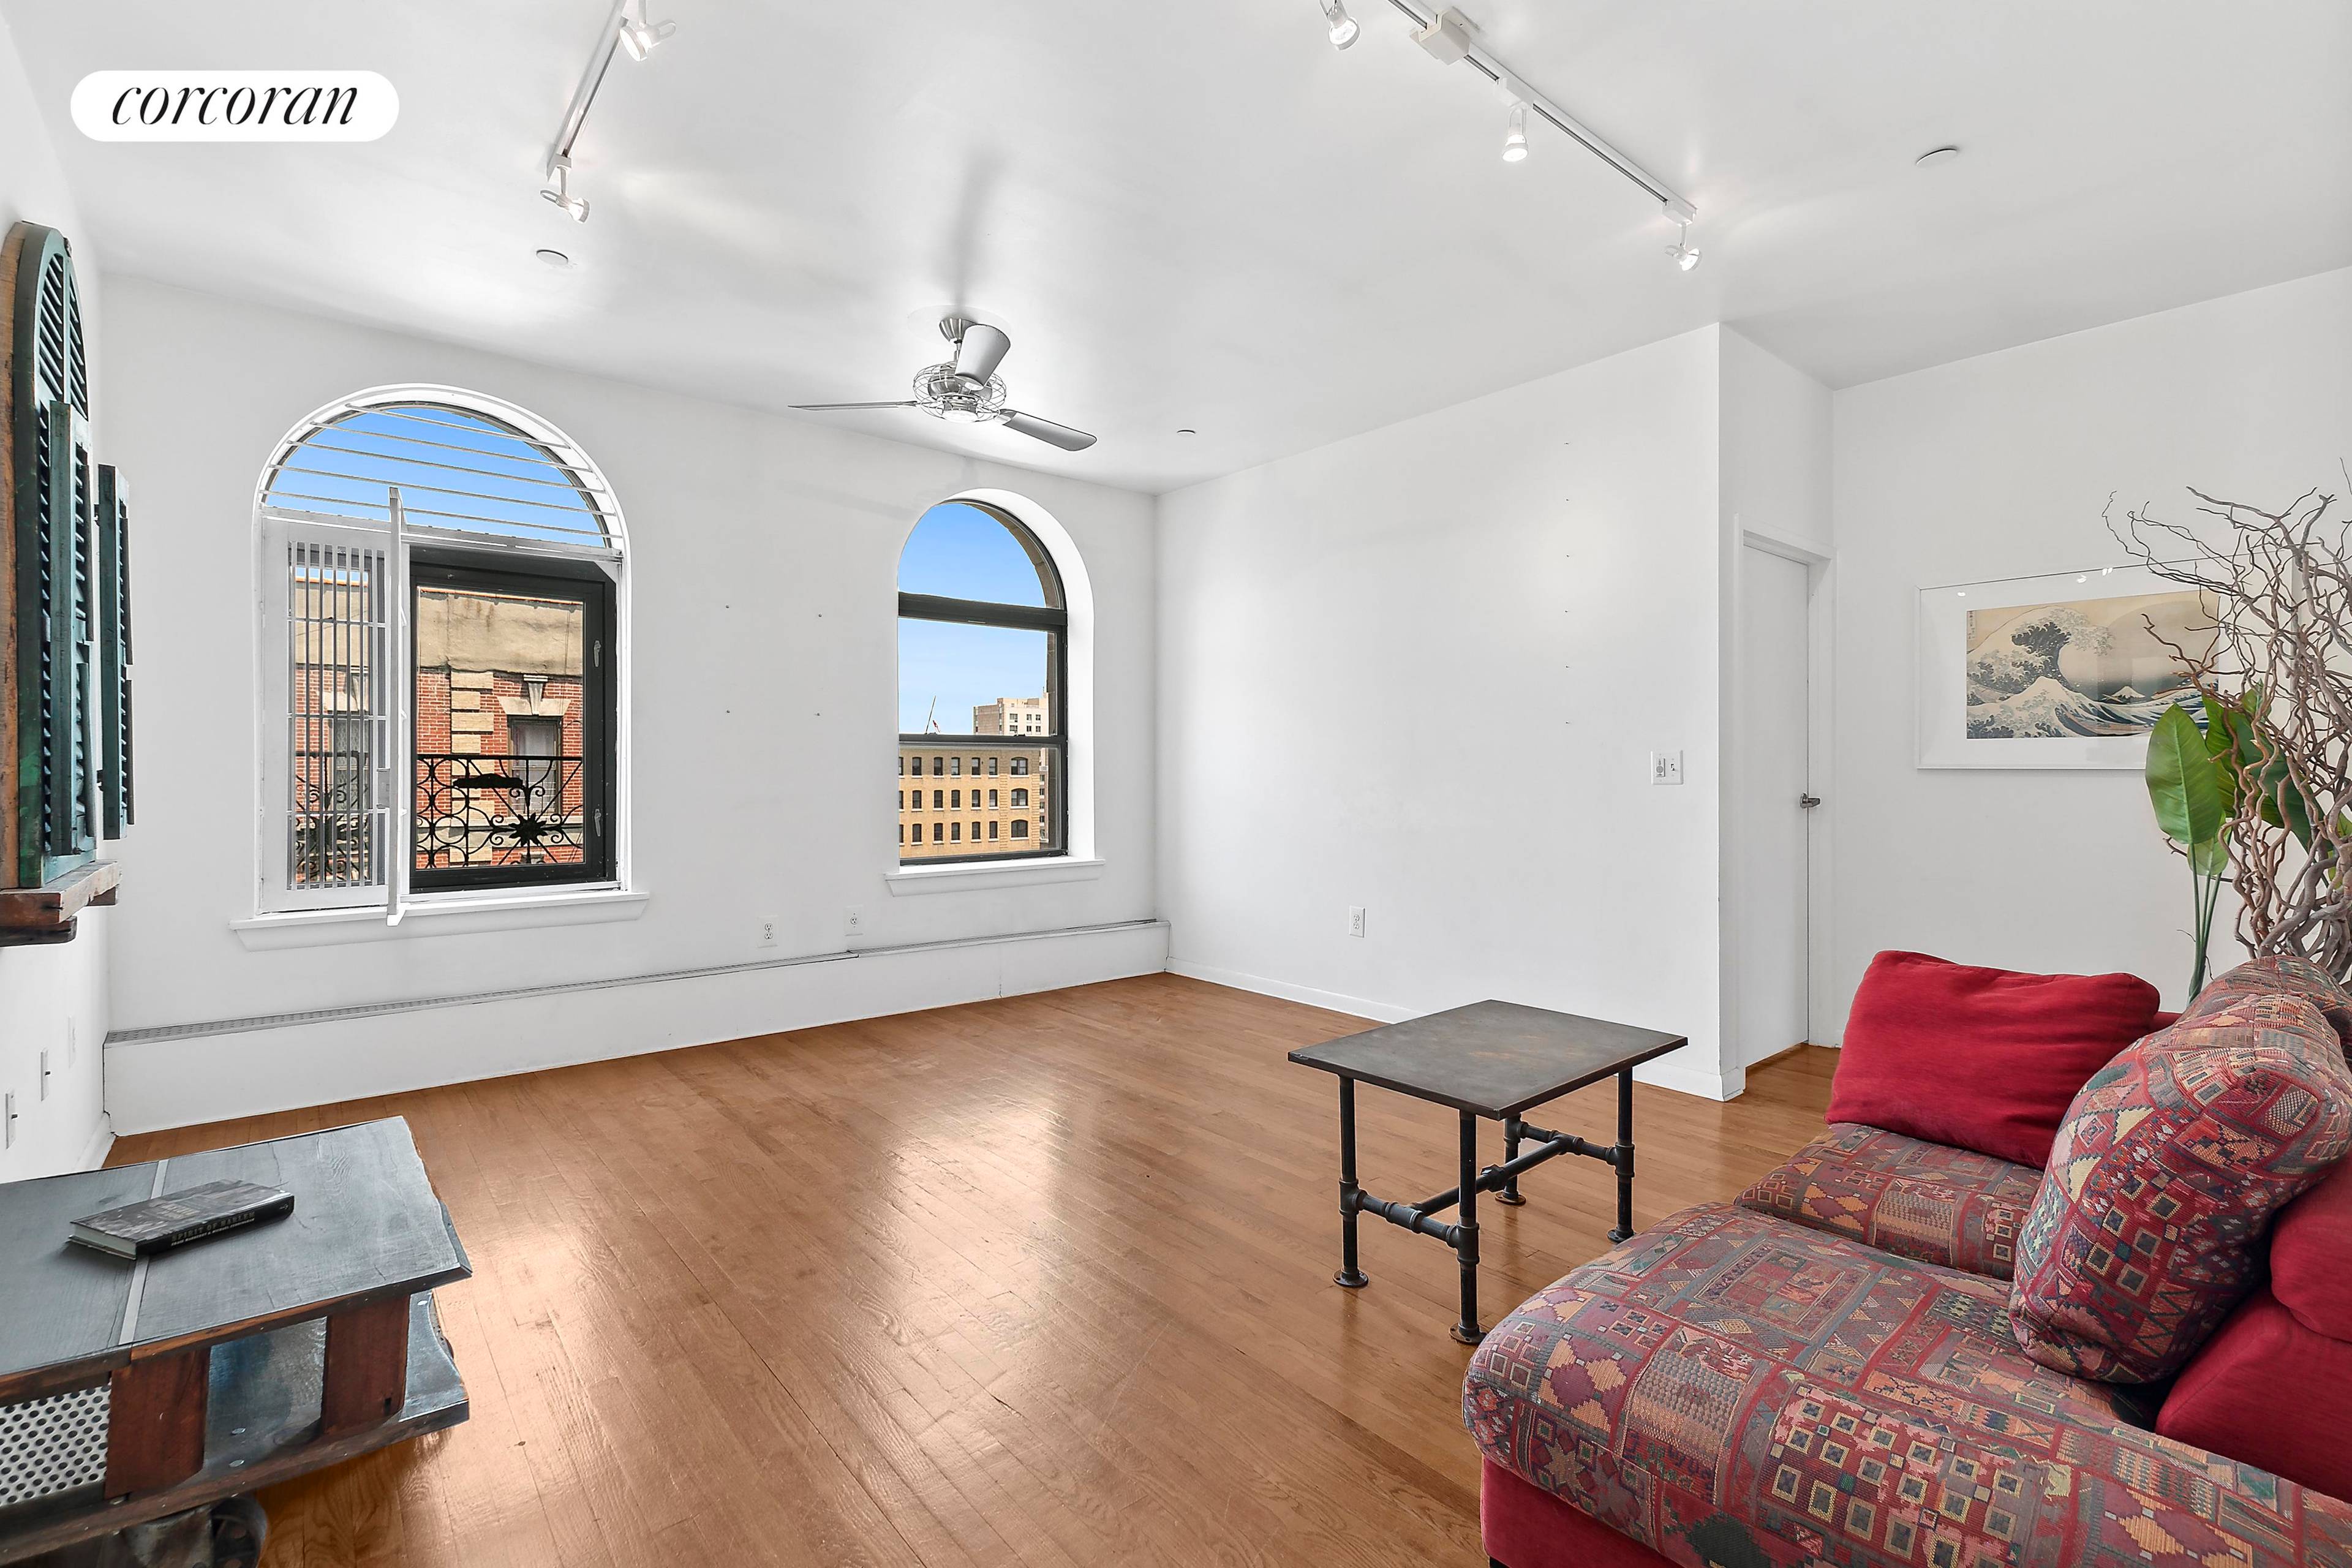 Step inside your new home at 54 East 129th Street, nestled in the heart of vibrant Harlem.